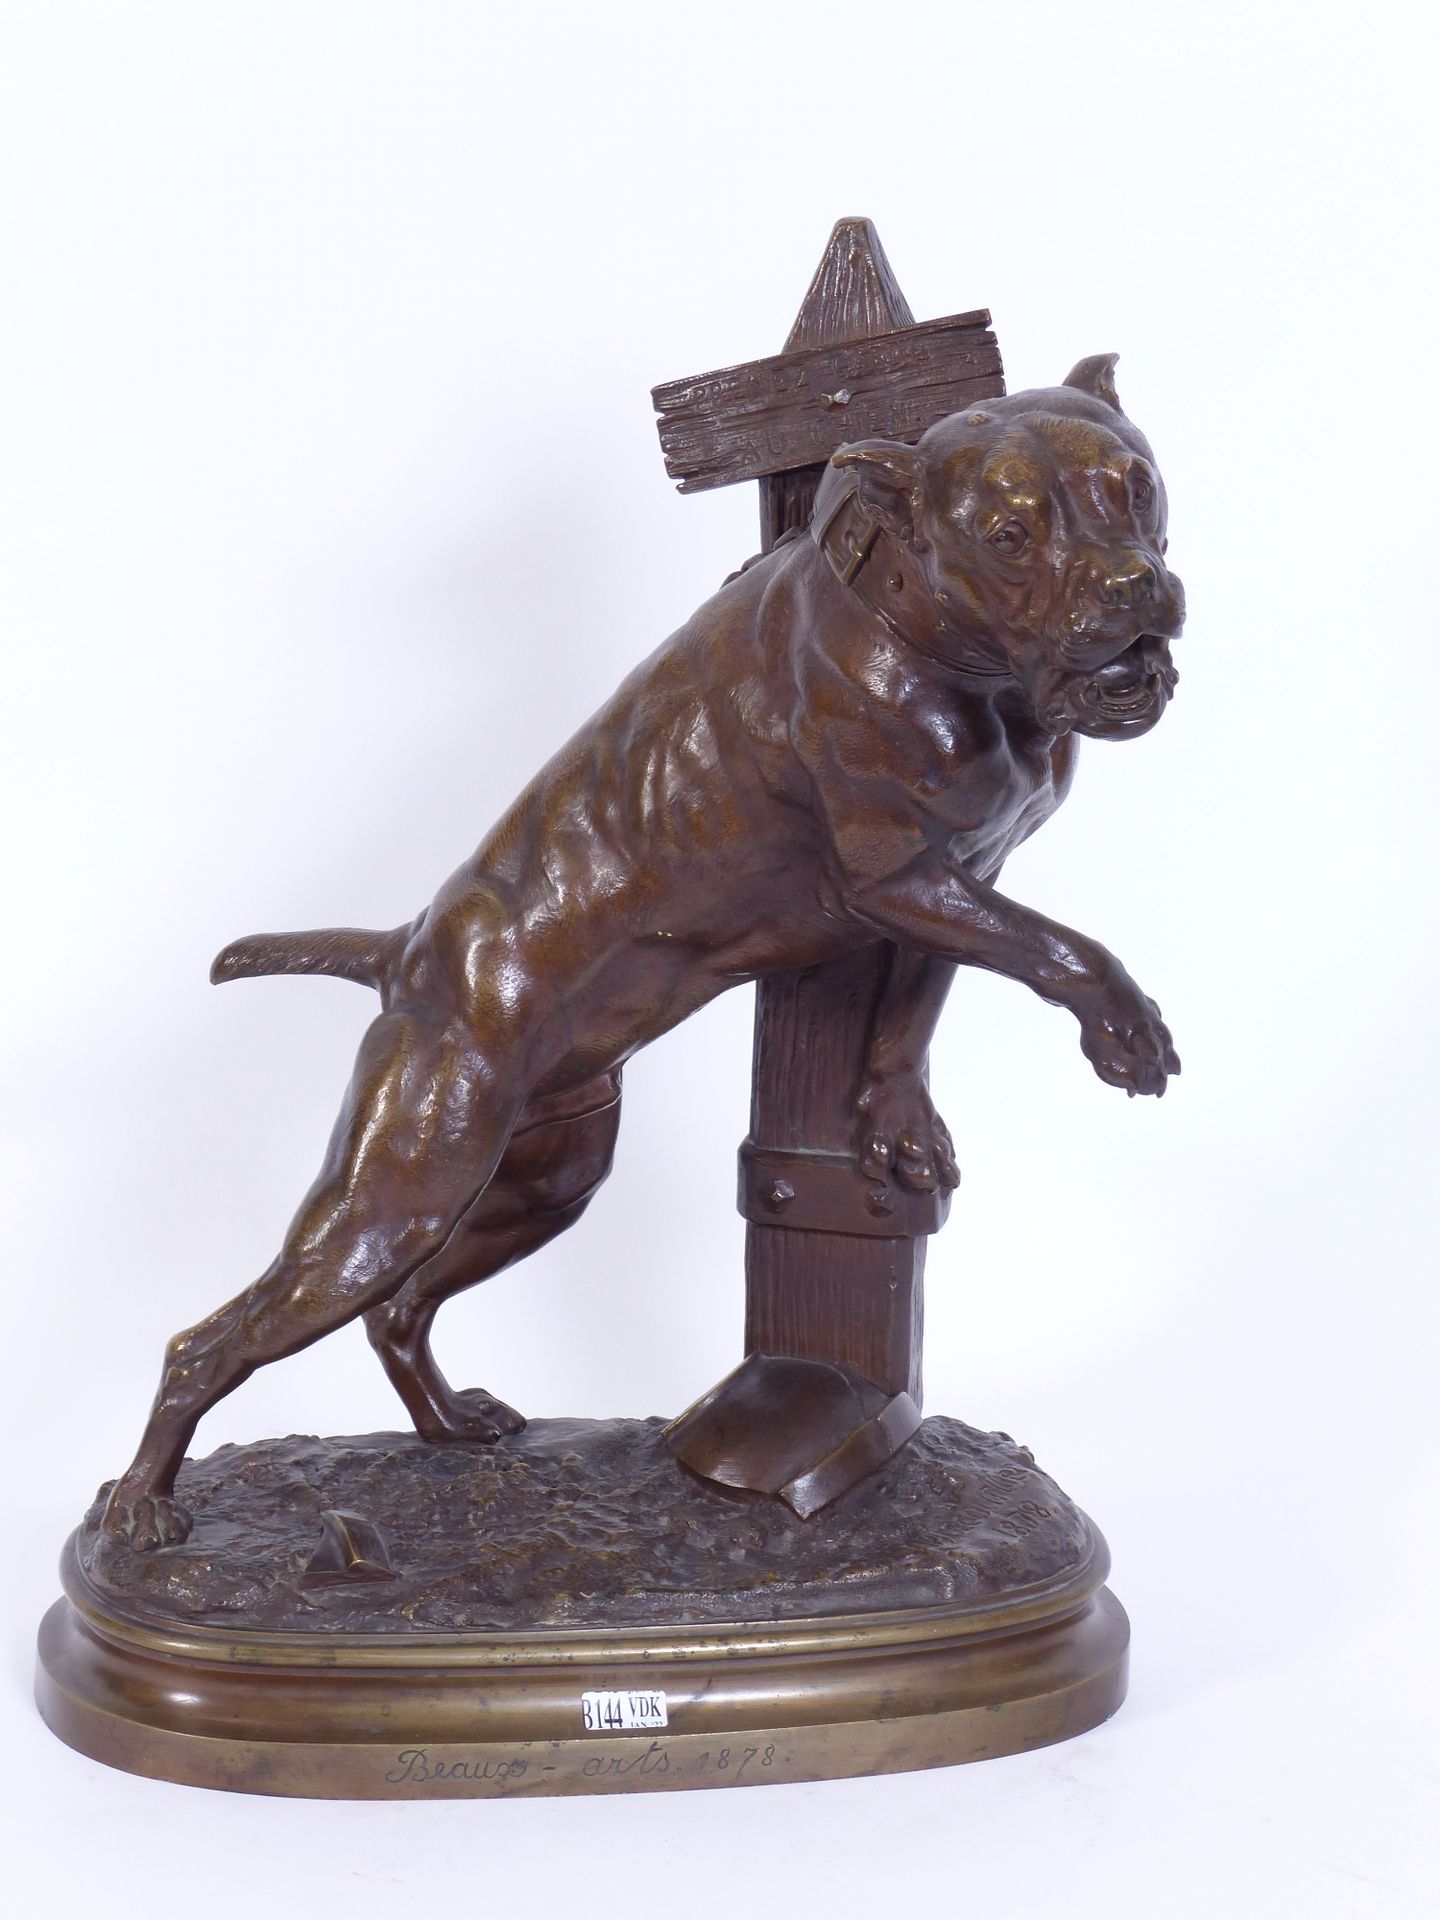 LECOURTIER Prosper (1855 - 1924) "Take care of the dog" in bronze with brown and&hellip;